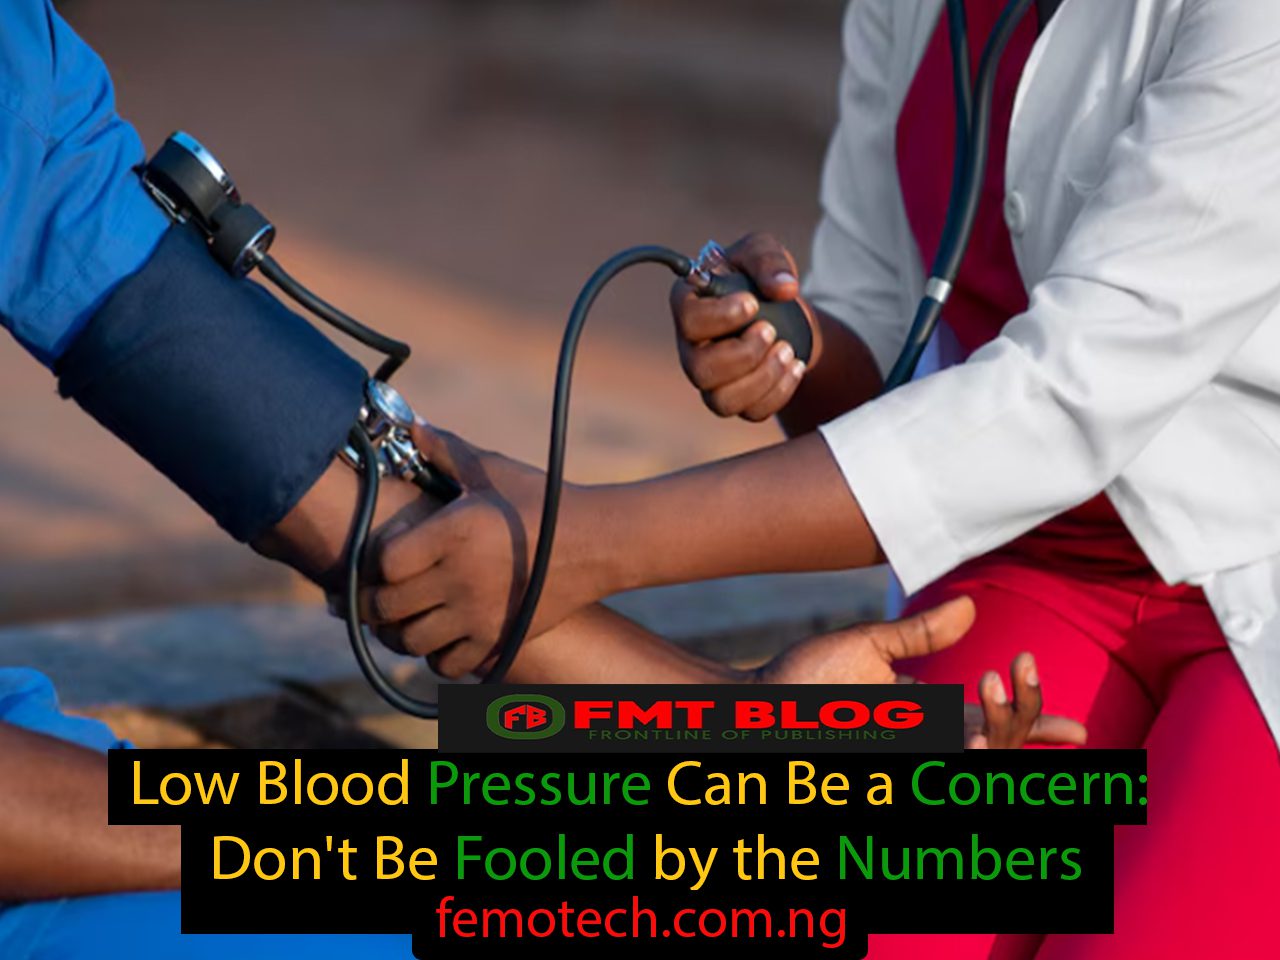 Low Blood Pressure Can Be a Concern: Don’t Be Fooled by the Numbers